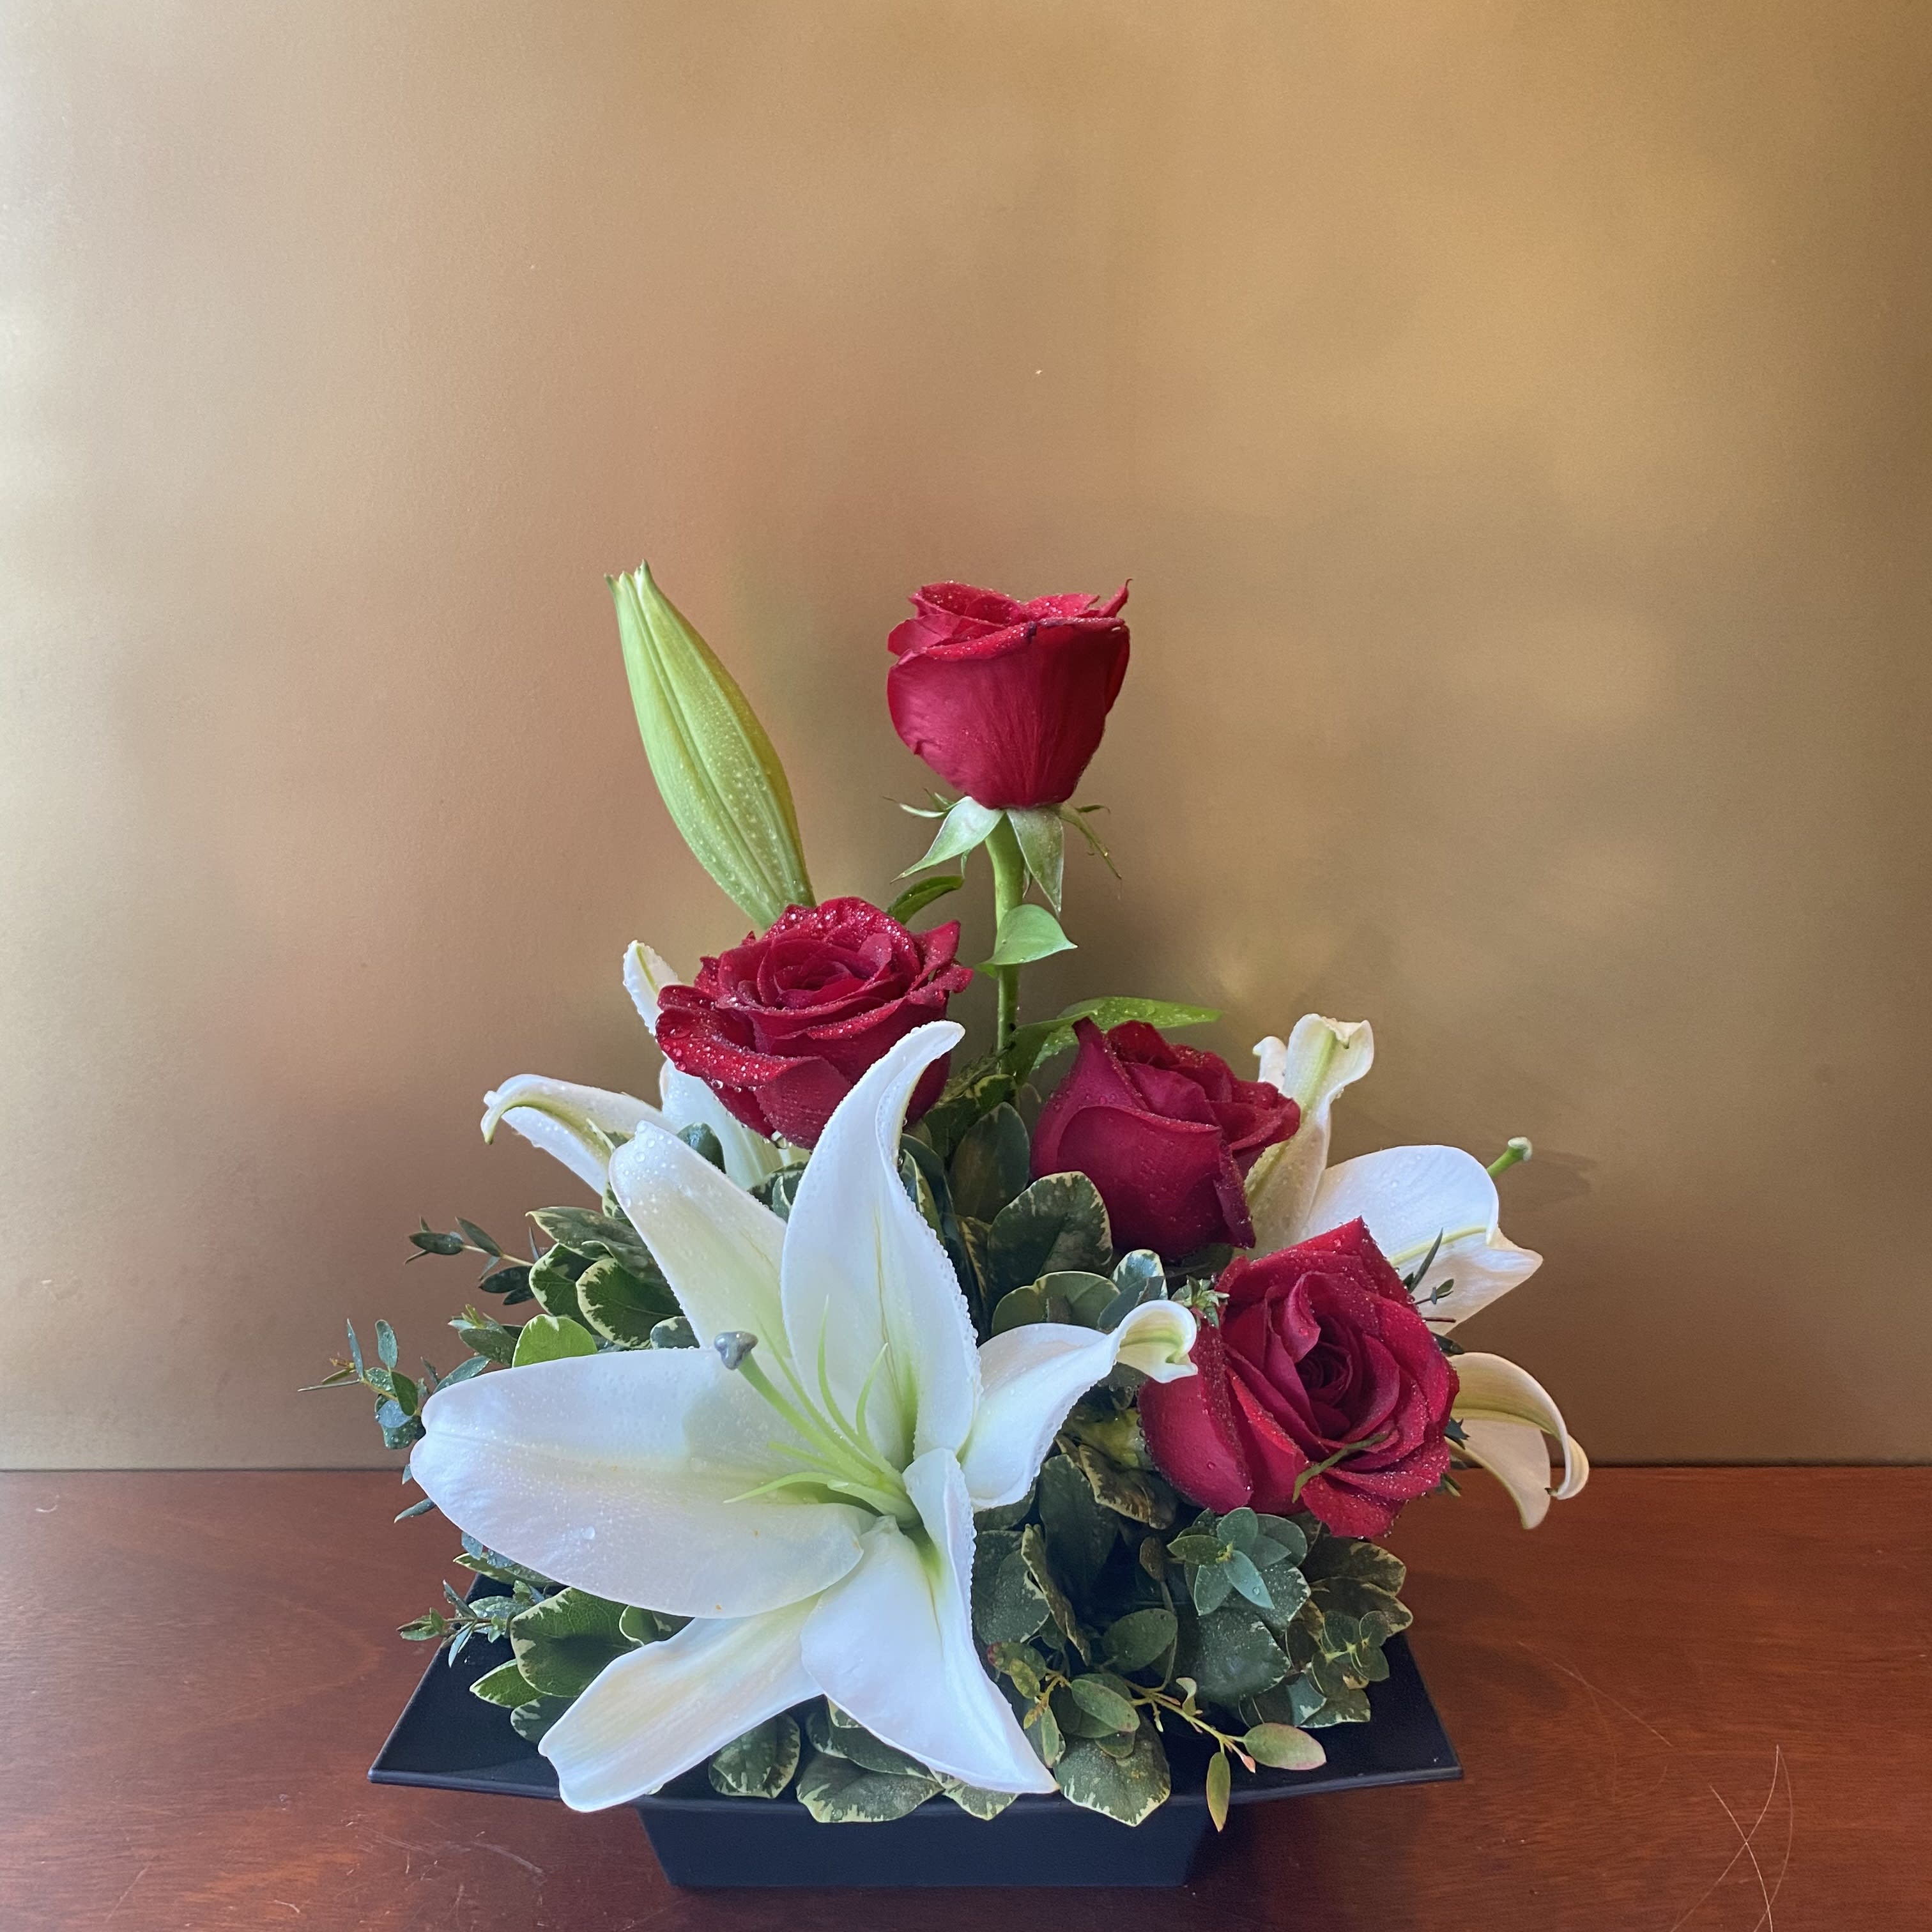 Full of Grace - This graceful arrangement of soft red and whites is quite a show stopper! Full of Grace combines white oriental lilies, red roses and tropical greens are arranged in a square design dish . No matter what the occasion, this is the perfect gift!